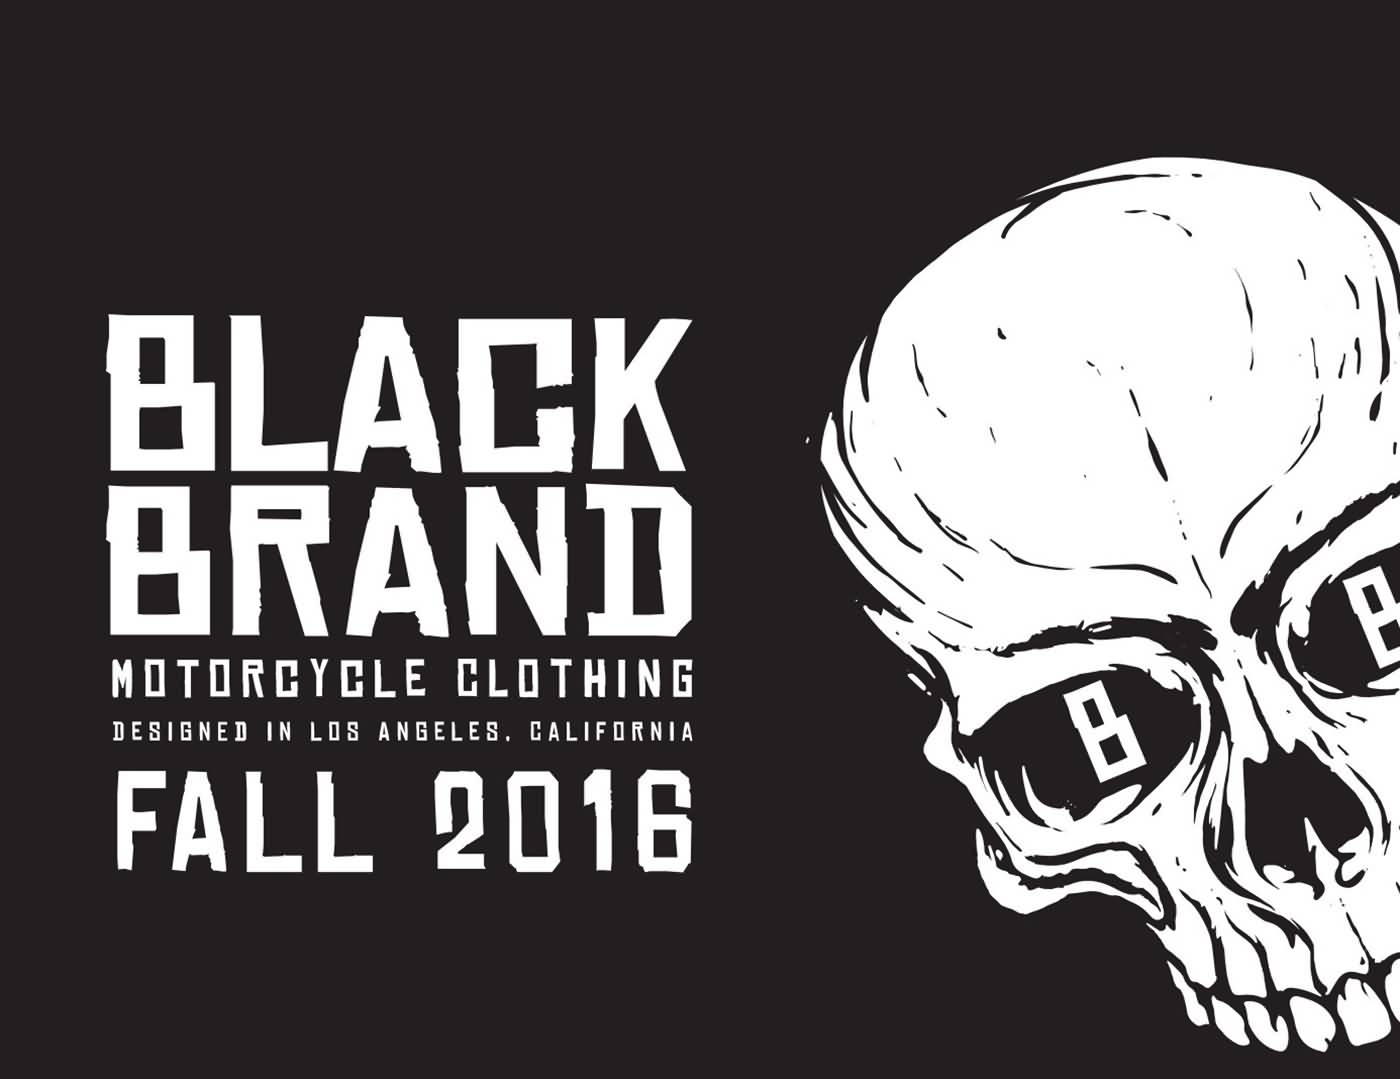 Black Brand Fall 2016 Street Motorcycle Clothing Overview